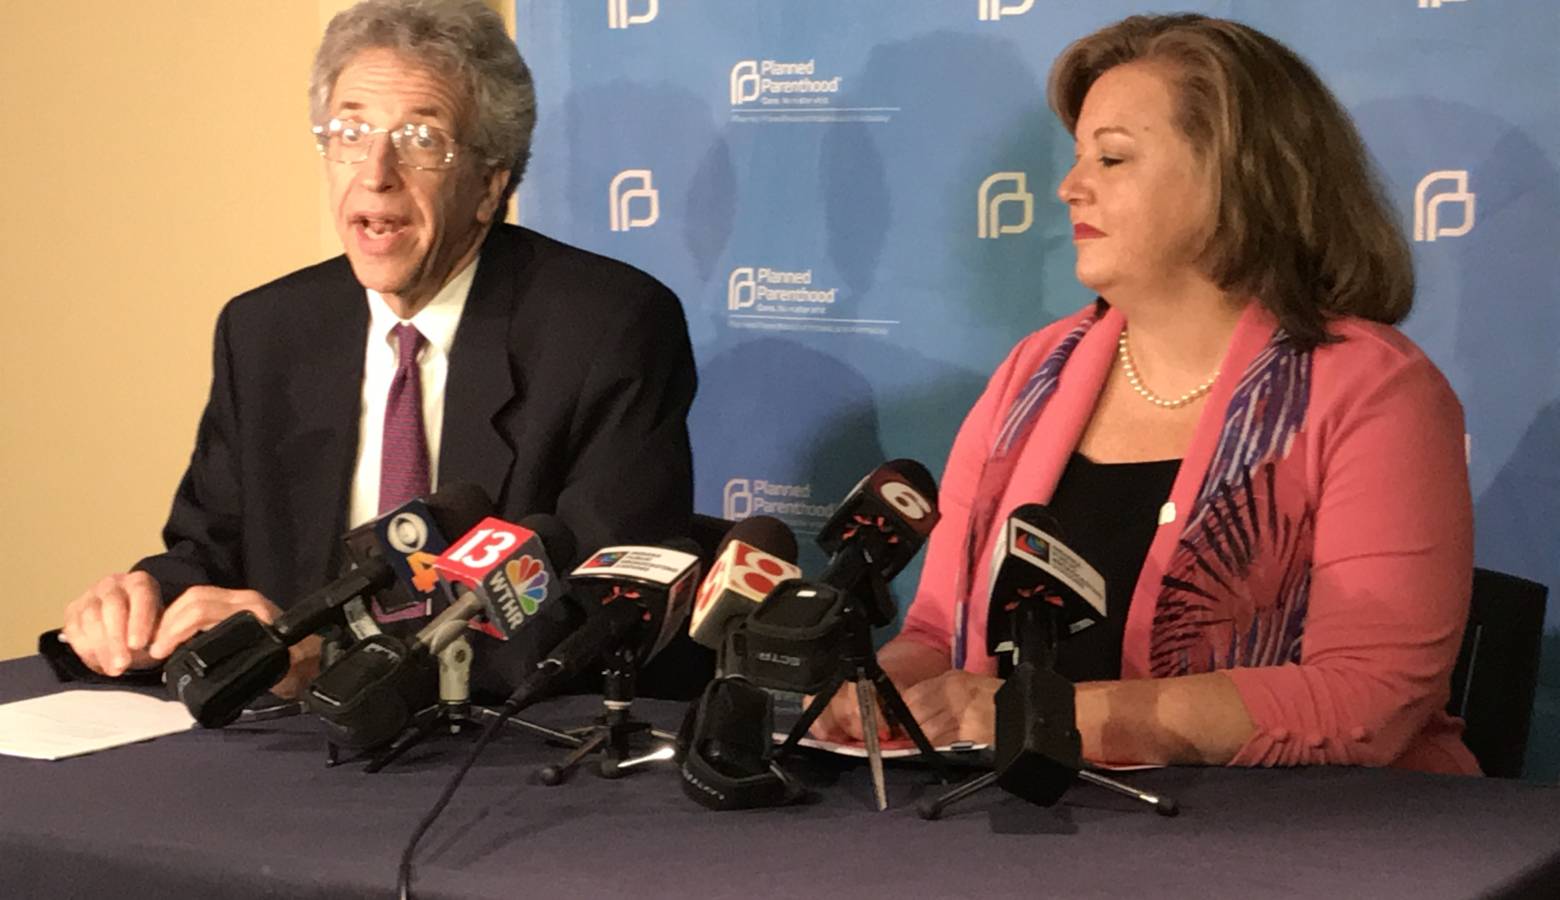 ACLU of Indiana Legal Director Ken Falk (left) and Planned Parenthood of Indiana and Kentucky CEO Christie Gillespie discuss their latest court victory. (Brandon Smith/IPB News)